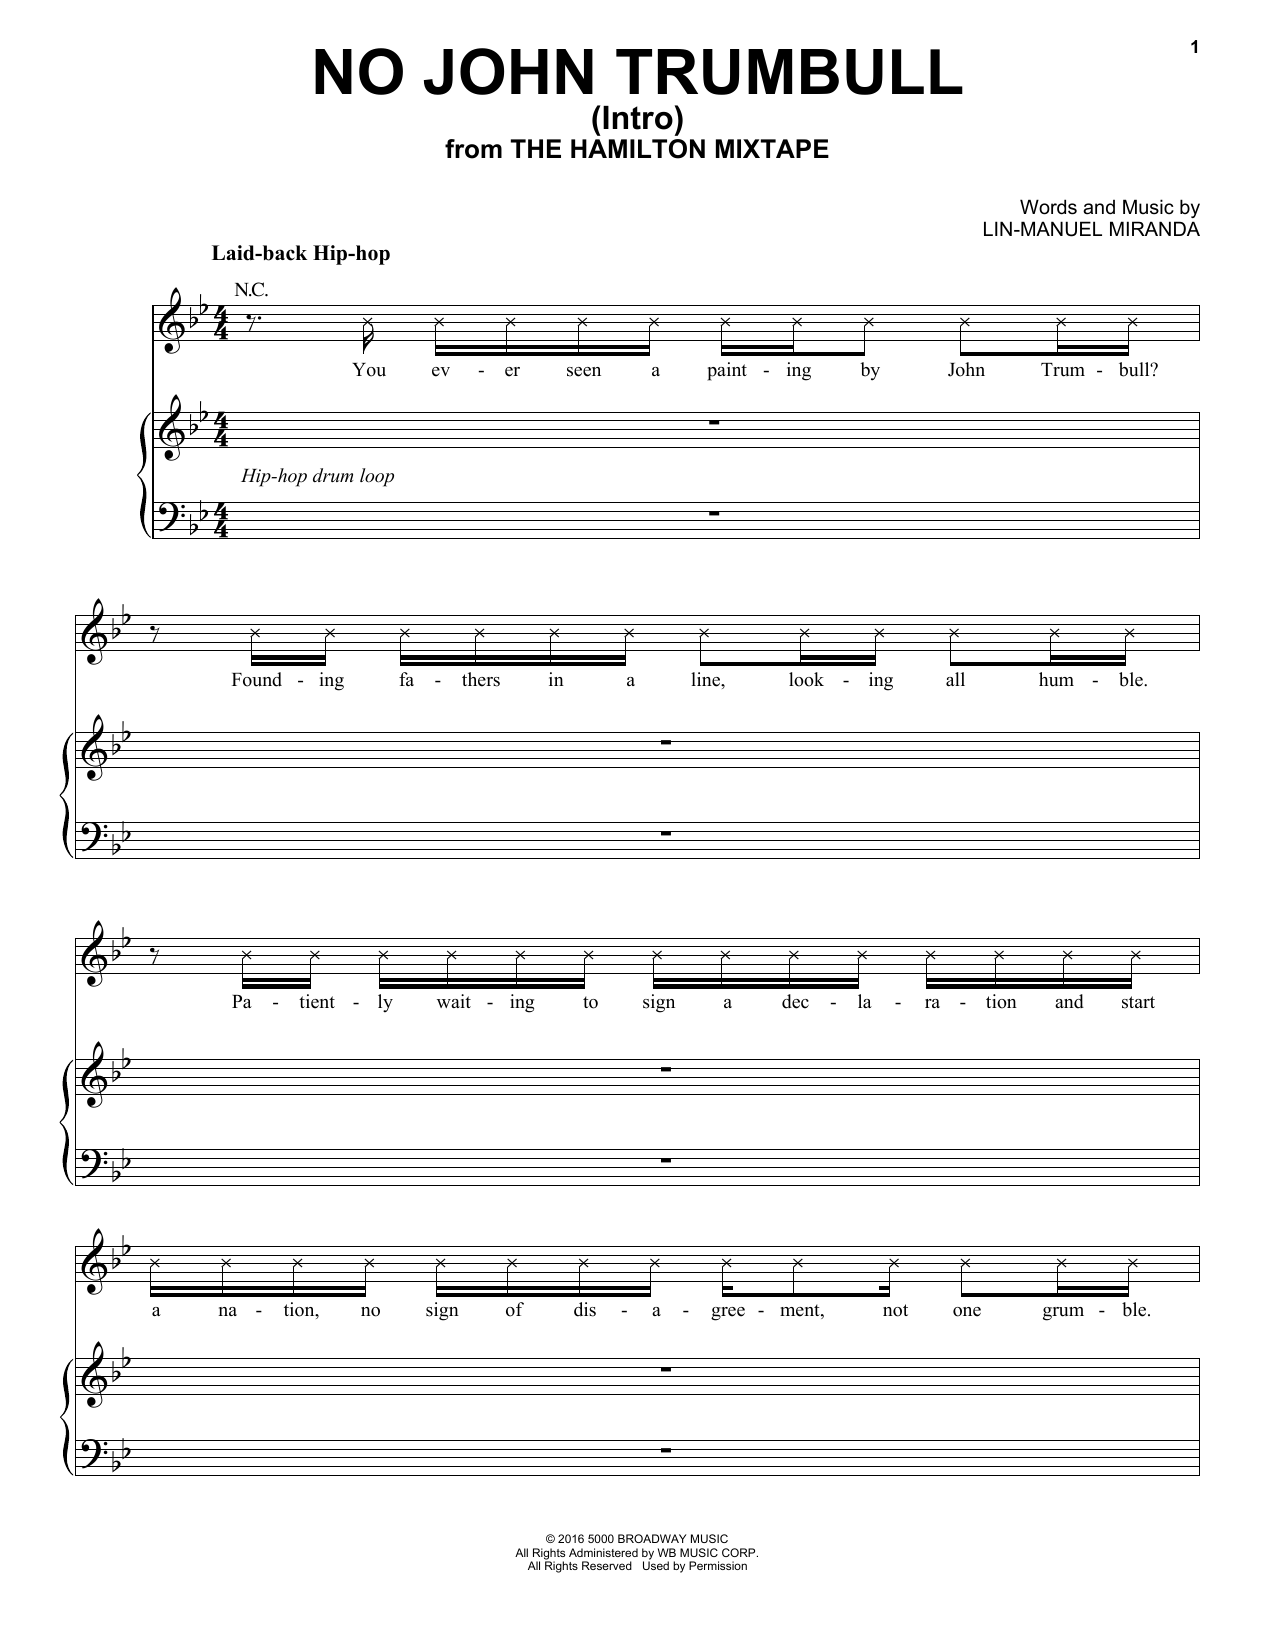 Download The Roots No John Trumbull (Intro) Sheet Music